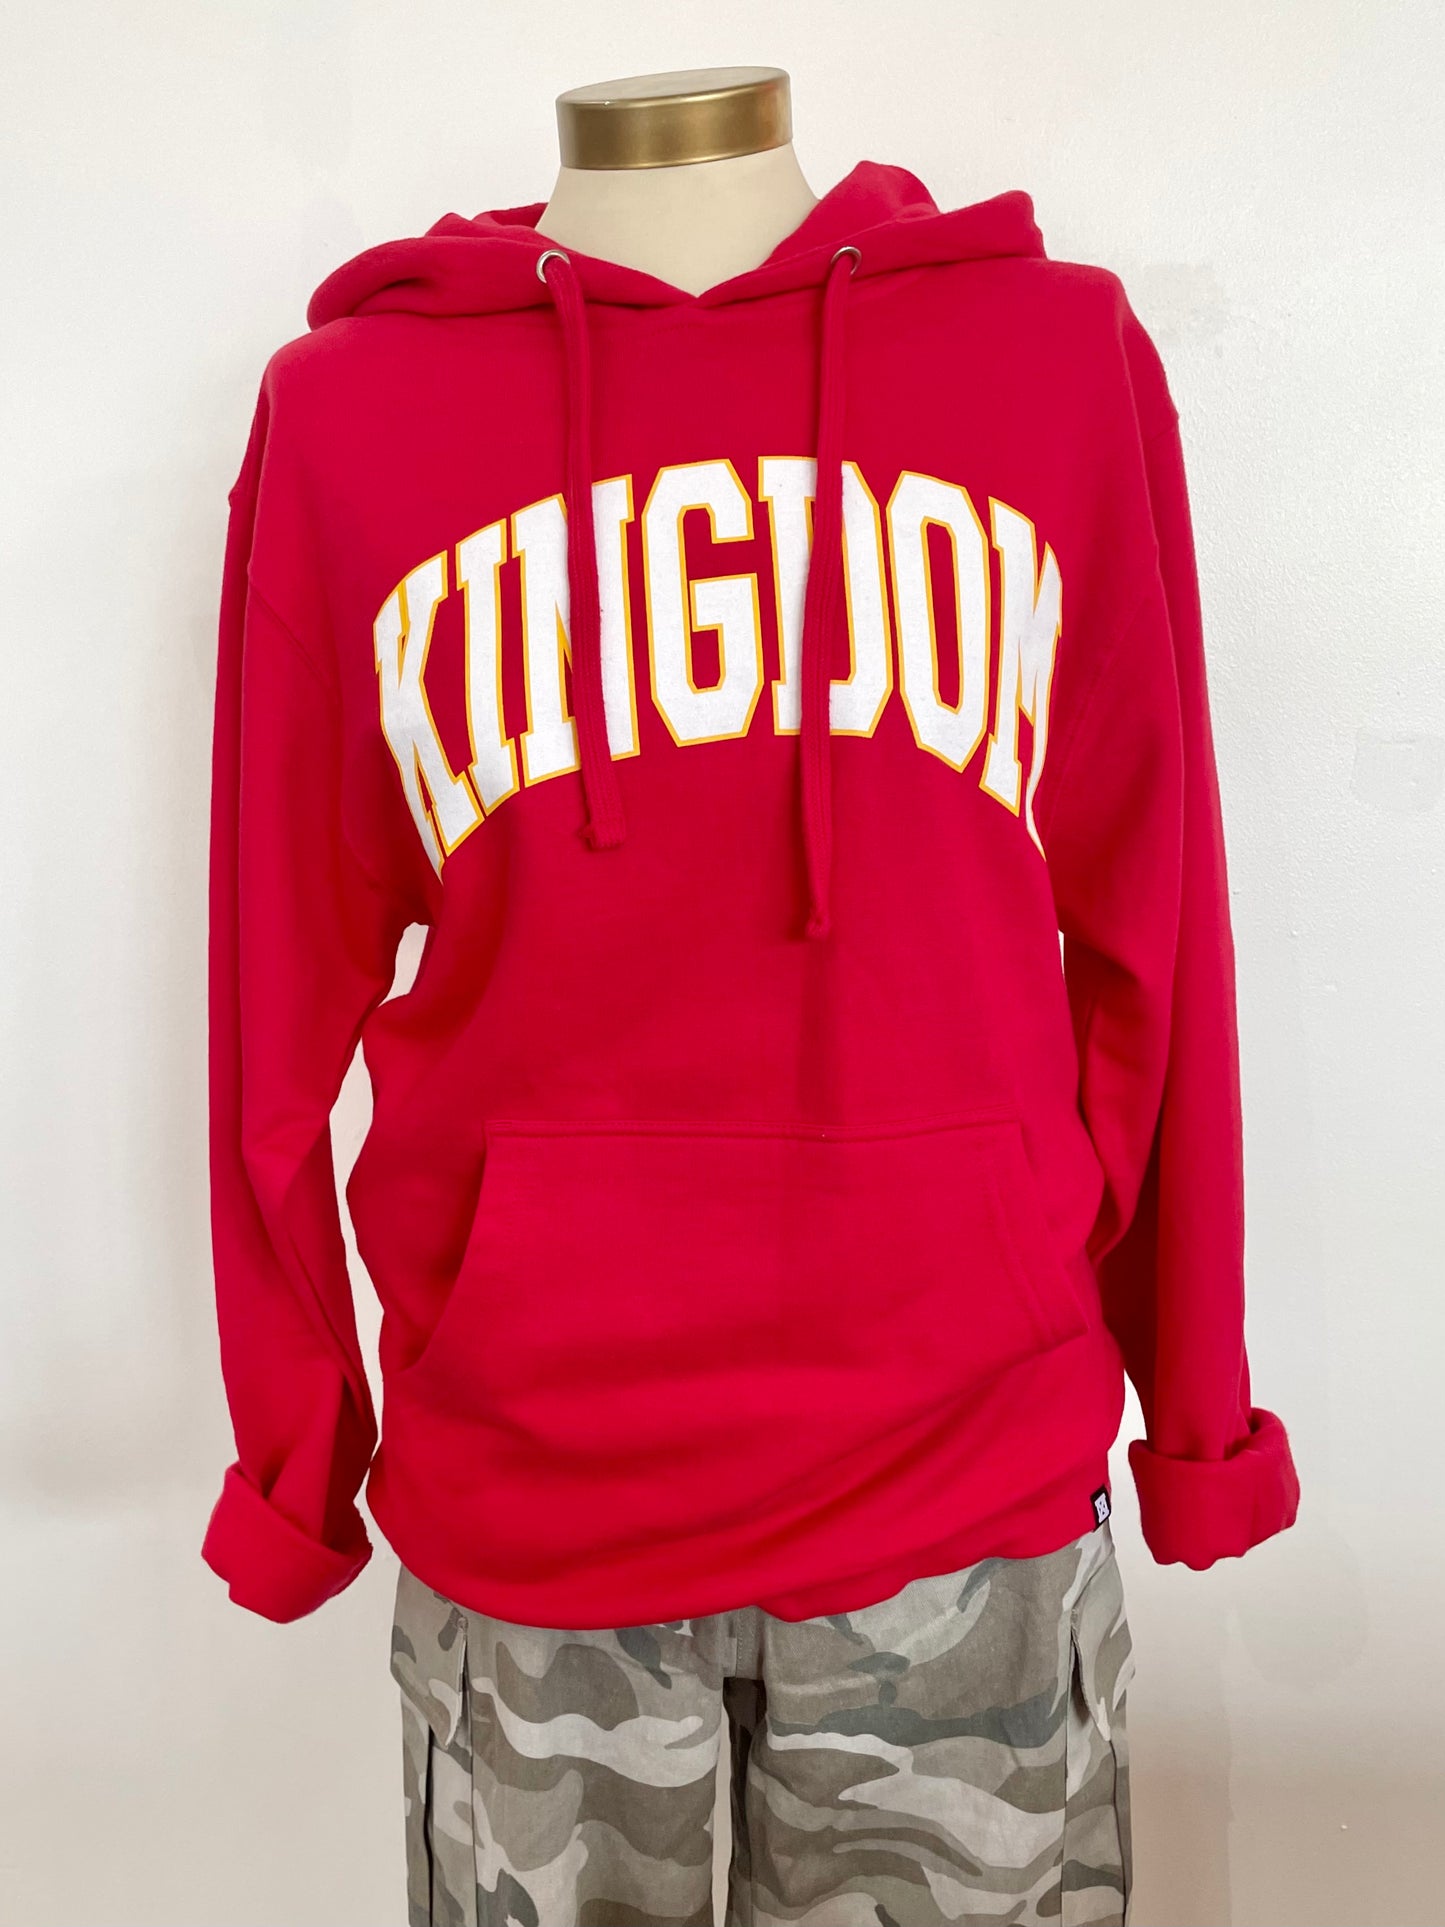 Red hoodie with Kingdom written on front